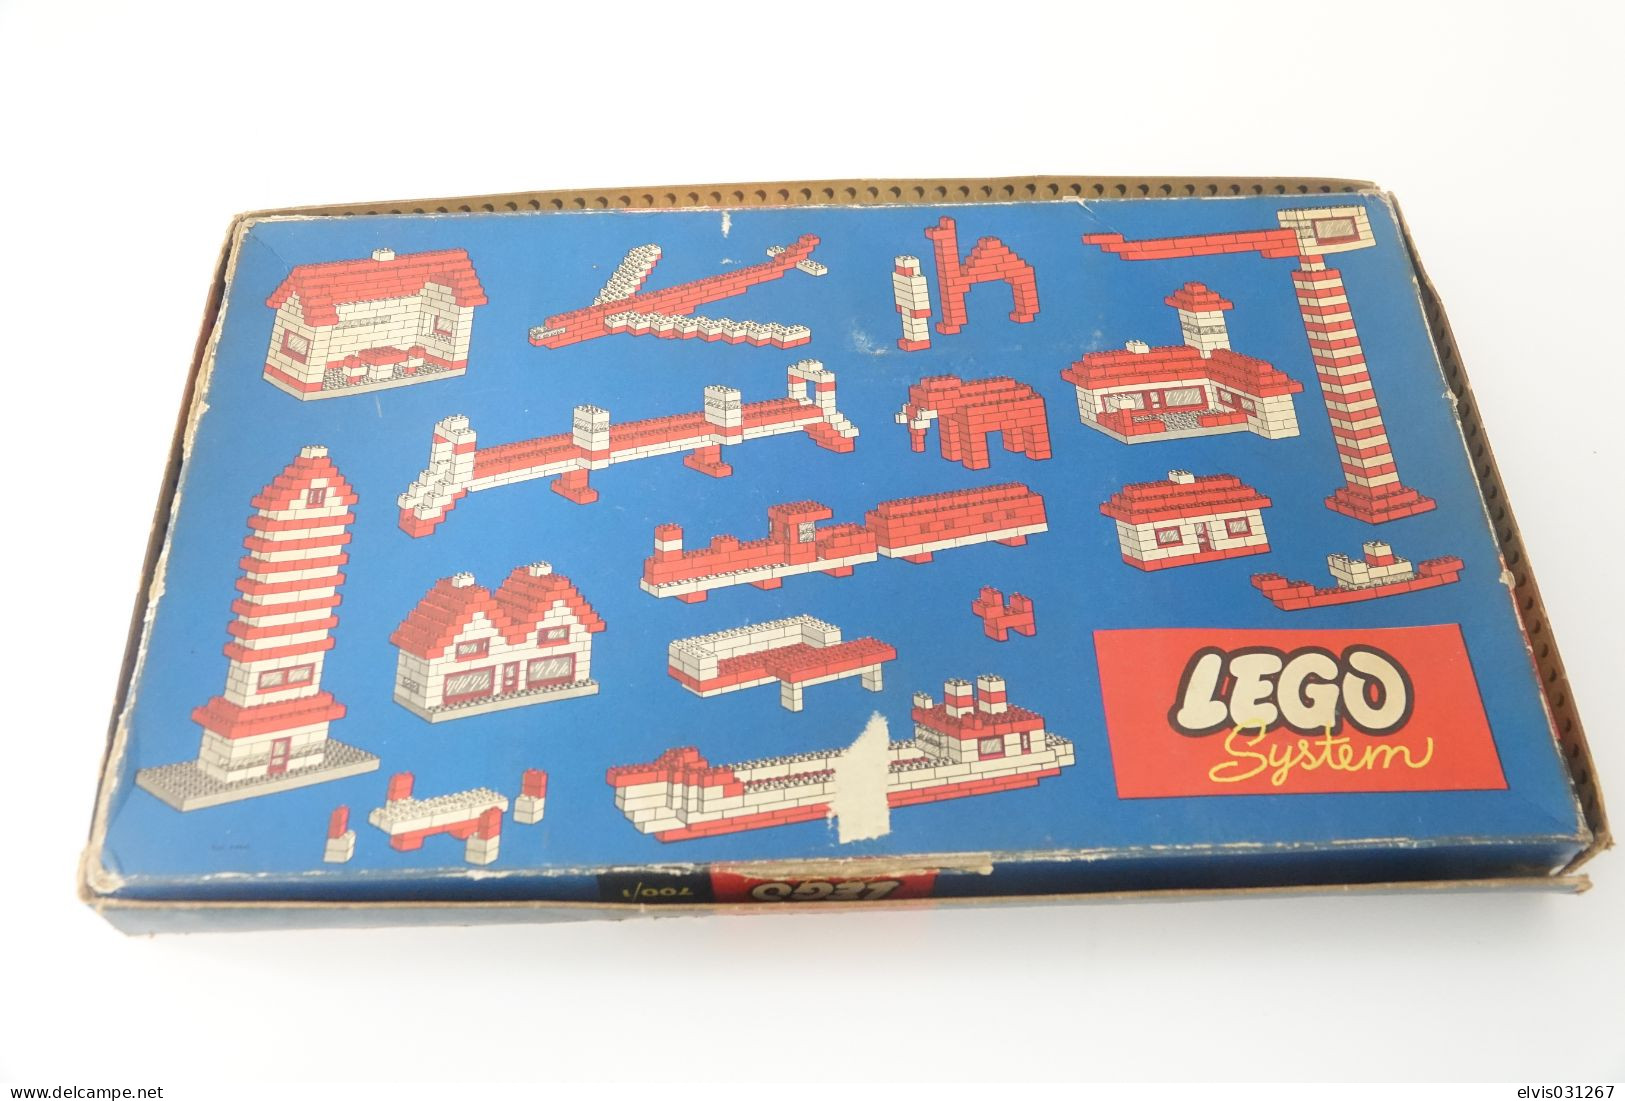 LEGO - 700/1 Gift Package (Lego Mursten) Extremely Rare 1st edition - collector item - Original Lego 1956 - Vintage